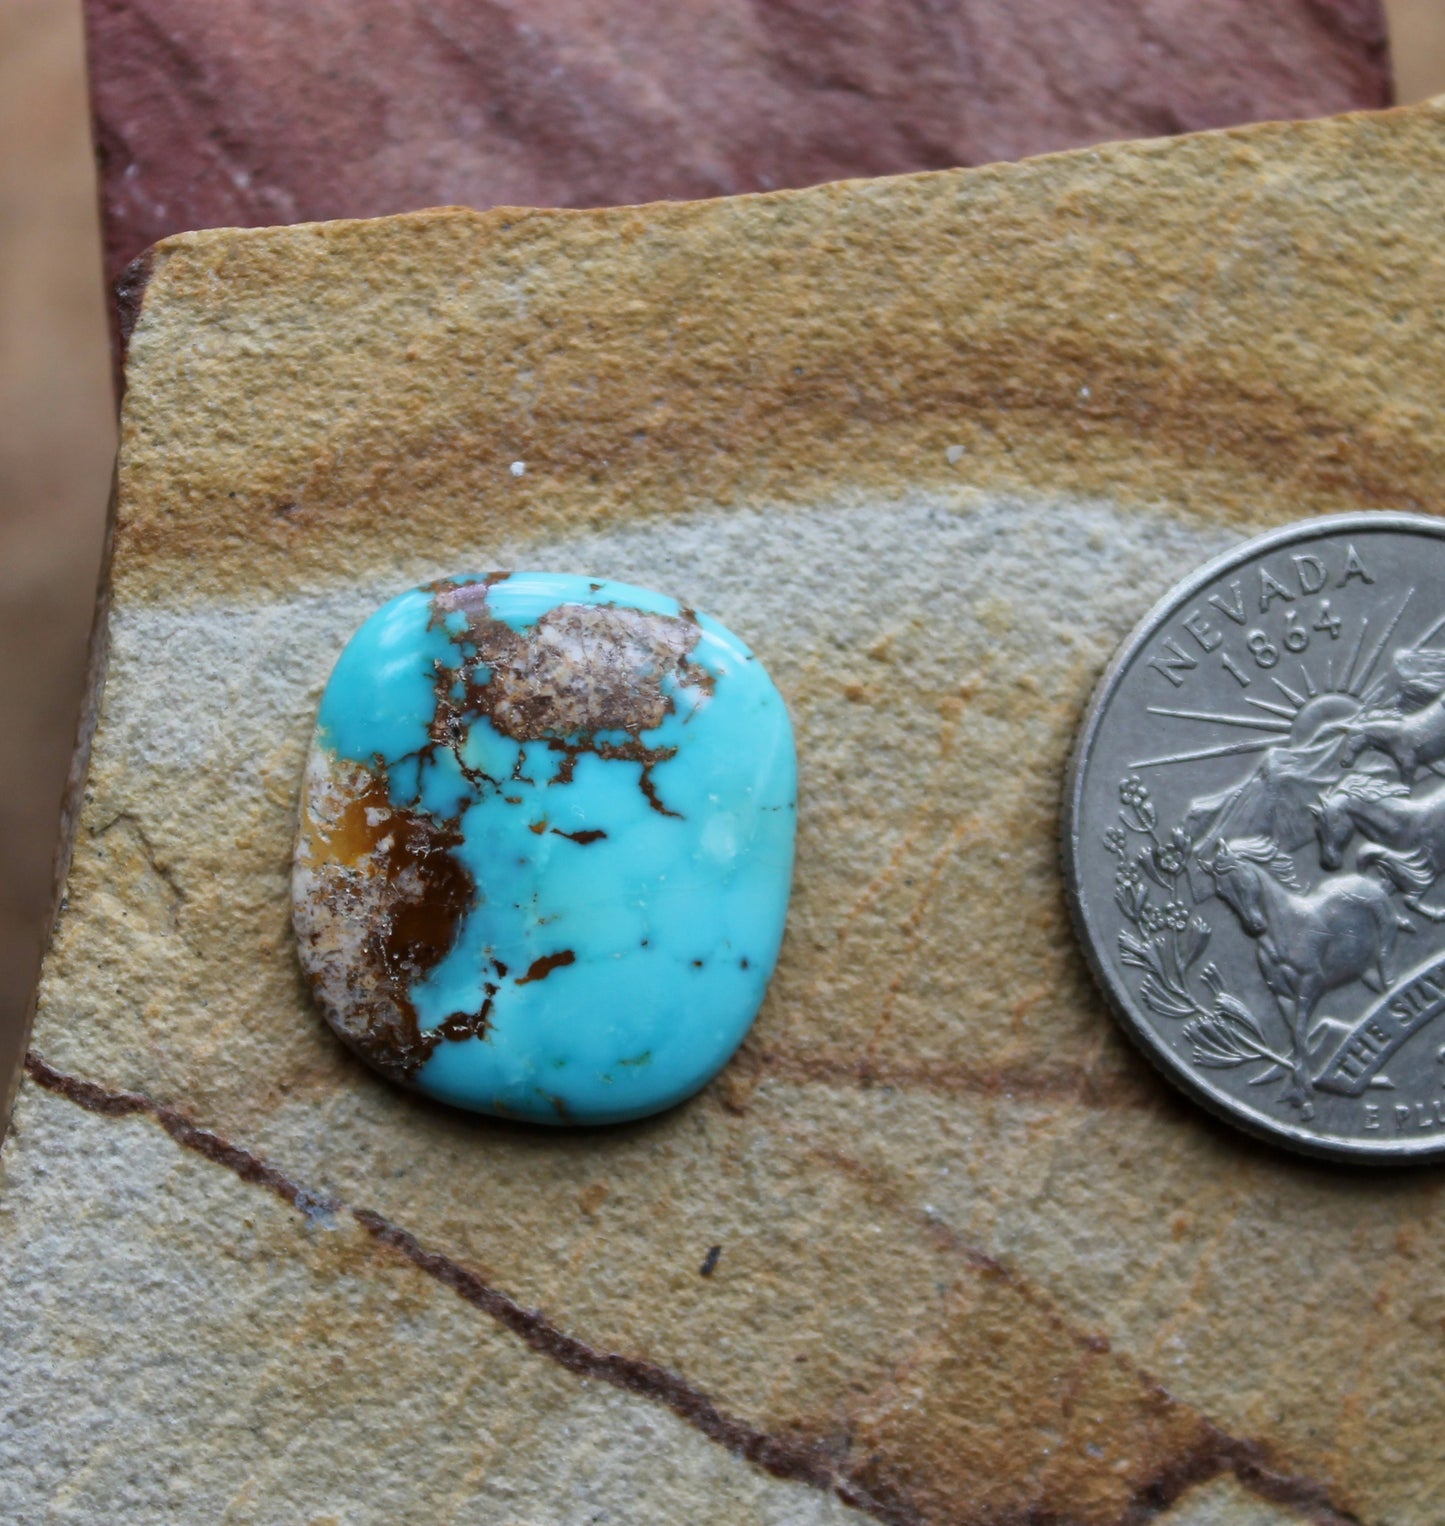 9 carat blue turquoise cabochon from Stone Mountain Mine with red matrix